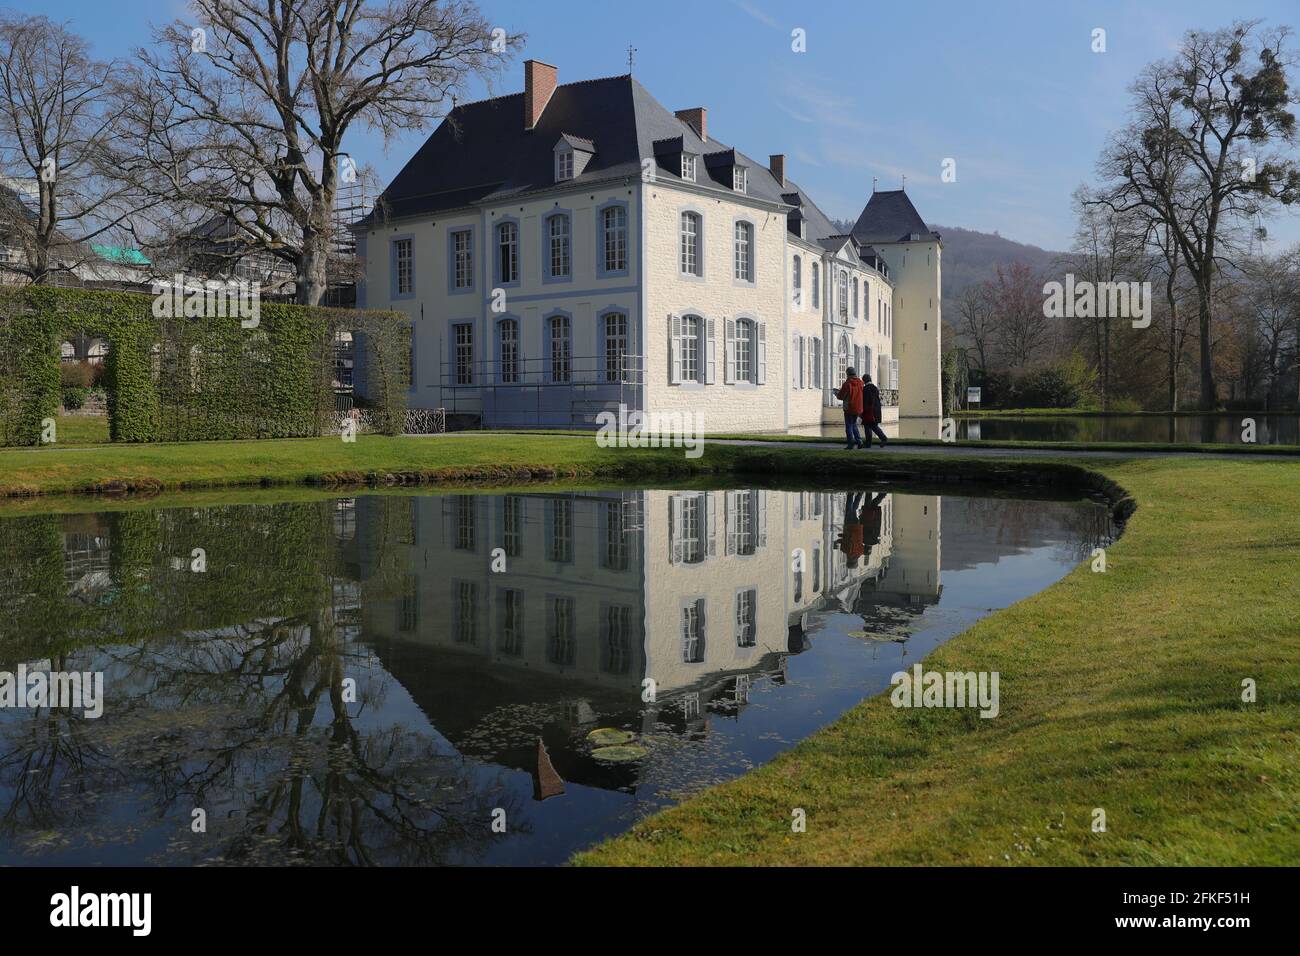 Namur, Belgium. 1st May, 2021. Tourists visit the Water Gardens of Annevoie in Annevoie-Rouillon, Namur, Belgium, May 1, 2021. The Water Gardens of Annevoie were designed and built by Charles-Alexis de Montpellier in the 18th century, with the combination of three ideas: 'art enhancing nature', 'art in tune with nature' and 'art imitating nature'. In 1930 the Gardens were opened for the general public. In 1982, the entire estate, including the gardens and the buildings, were listed as Historical Monuments. Credit: Zheng Huansong/Xinhua/Alamy Live News Stock Photo